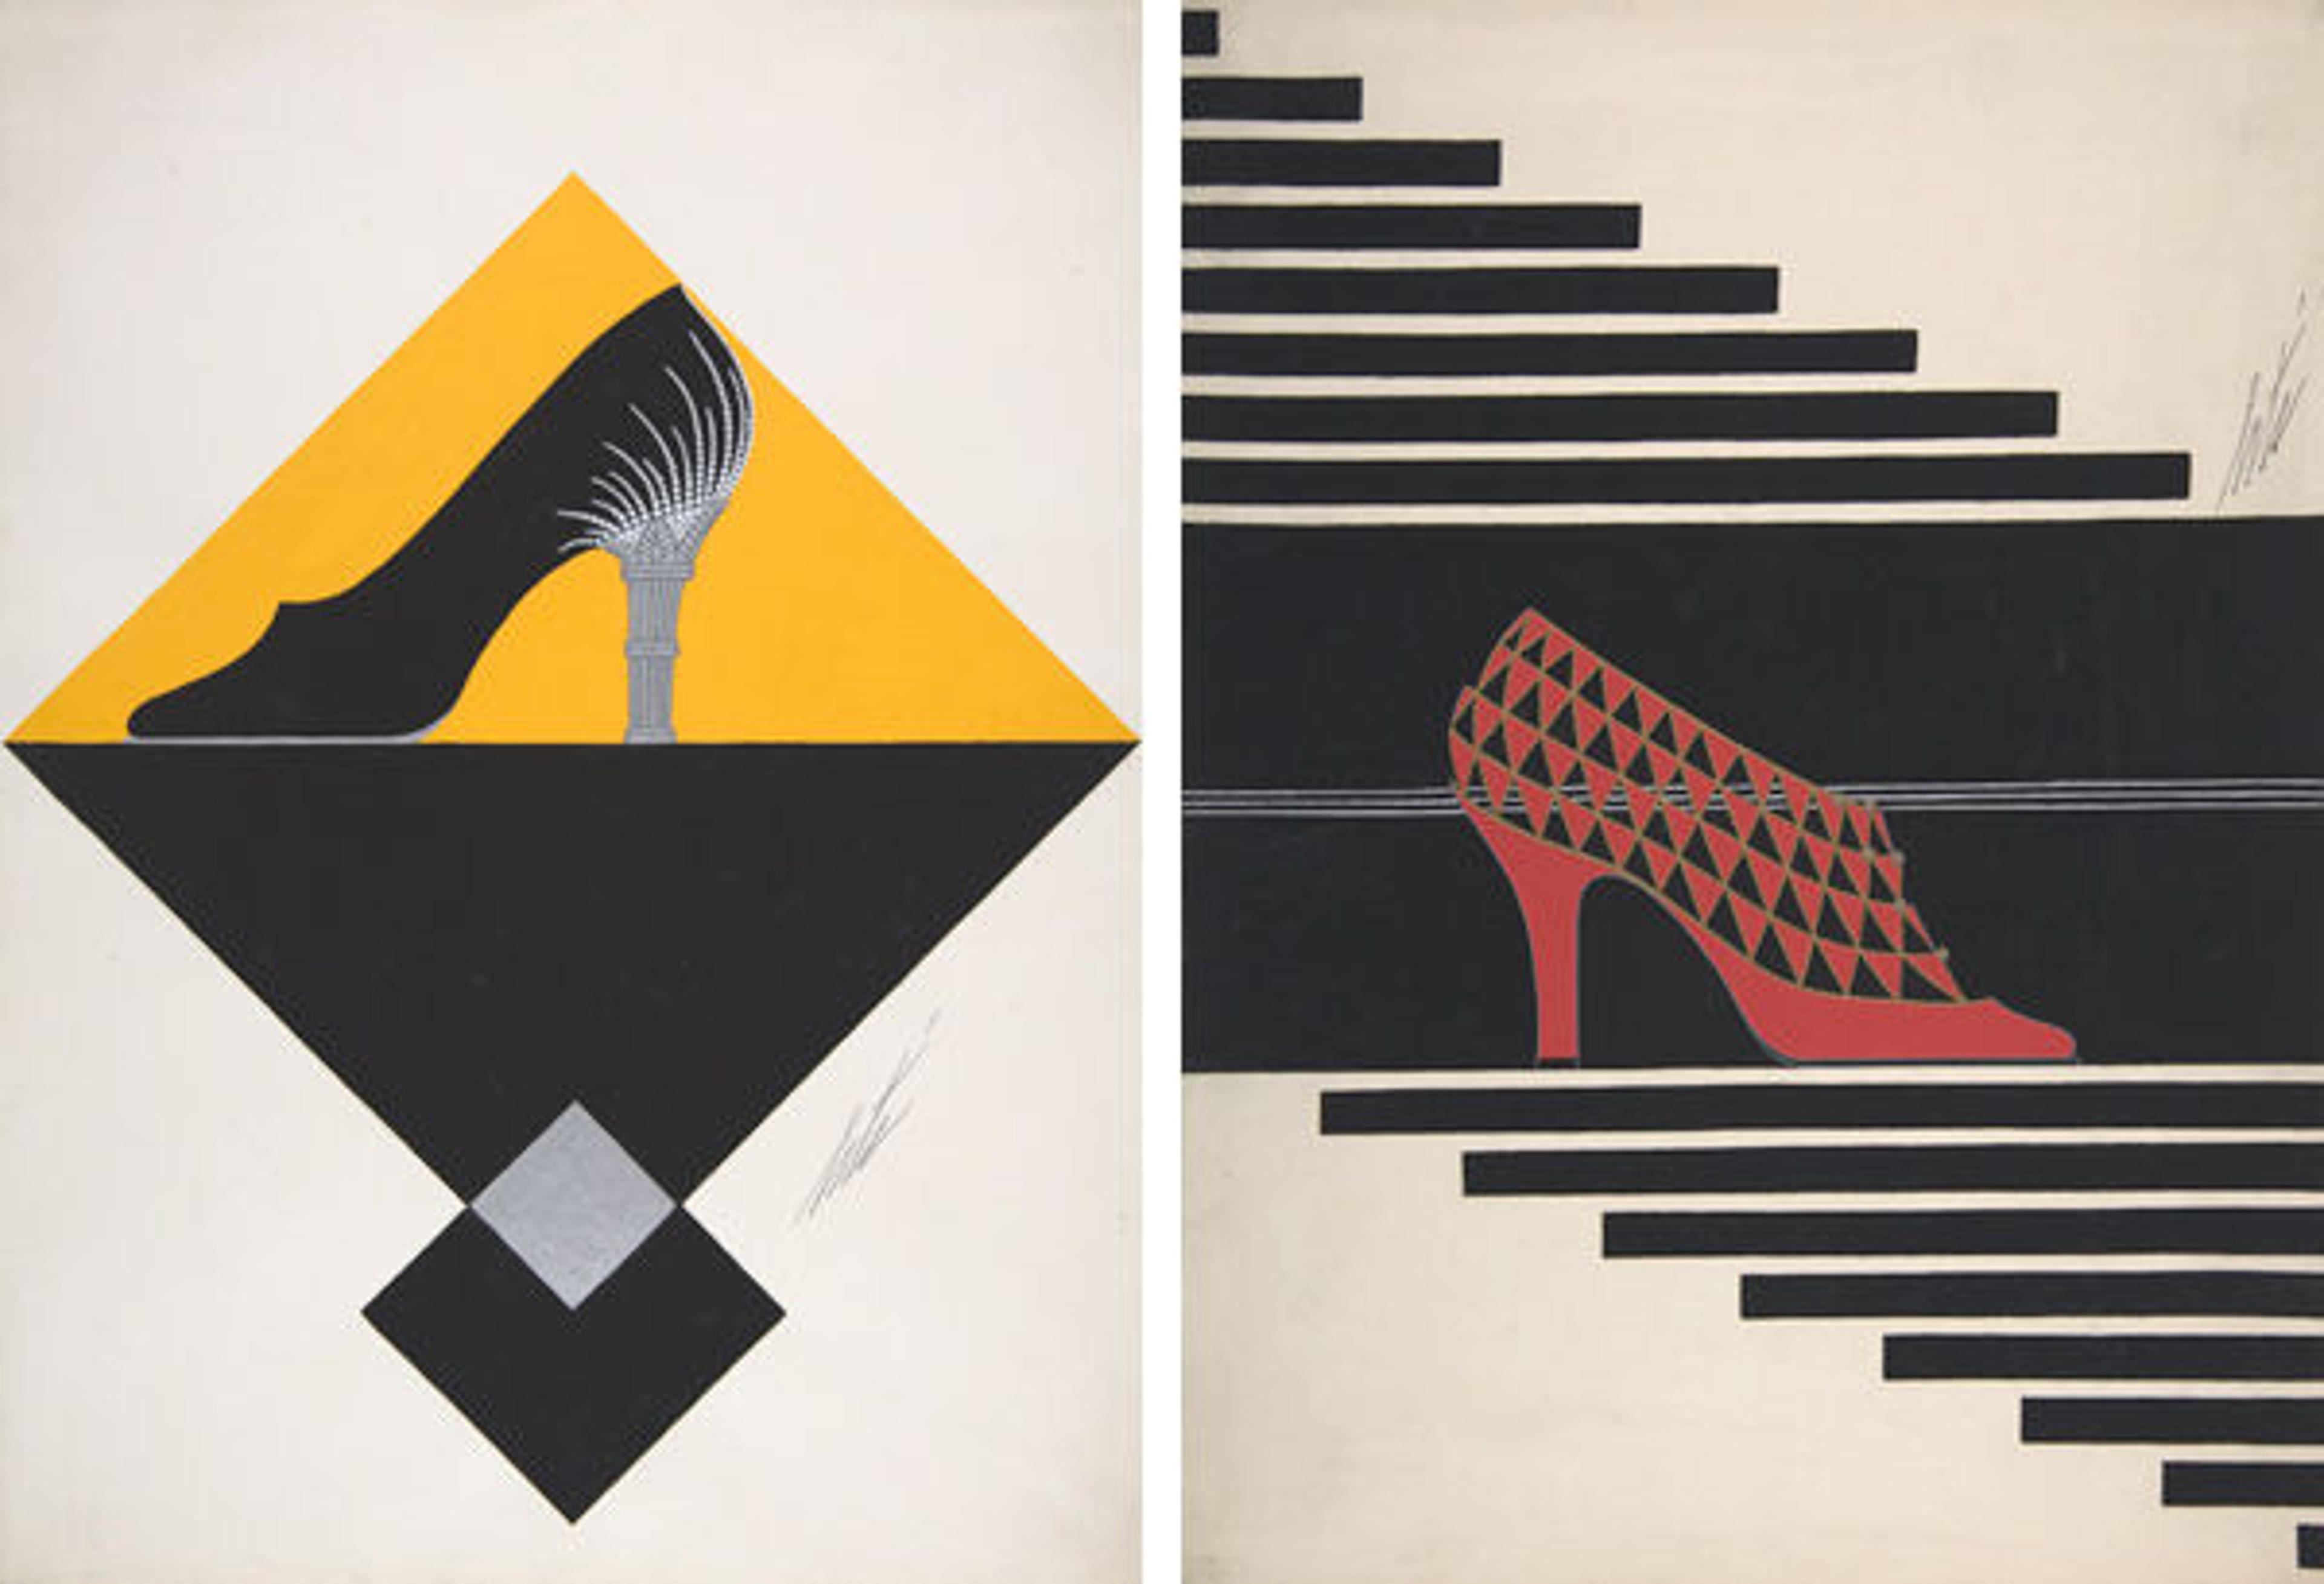 Fig. 8. Erté (Romain de Tirtoff) (French [born Russia], 1892–1990). Pair of Black Pumps with Openwork and Ombre Effect for Delman's Shoes, New York, 1934. Gouache; 10 7/8 x 14 15/16 in. (27.7 x 37.9 cm). The Metropolitan Museum of Art, New York, Purchase, The Martin Foundation Inc. Gift, 1967 (67.762.28). © 2015 Artists Rights Society (ARS) New York